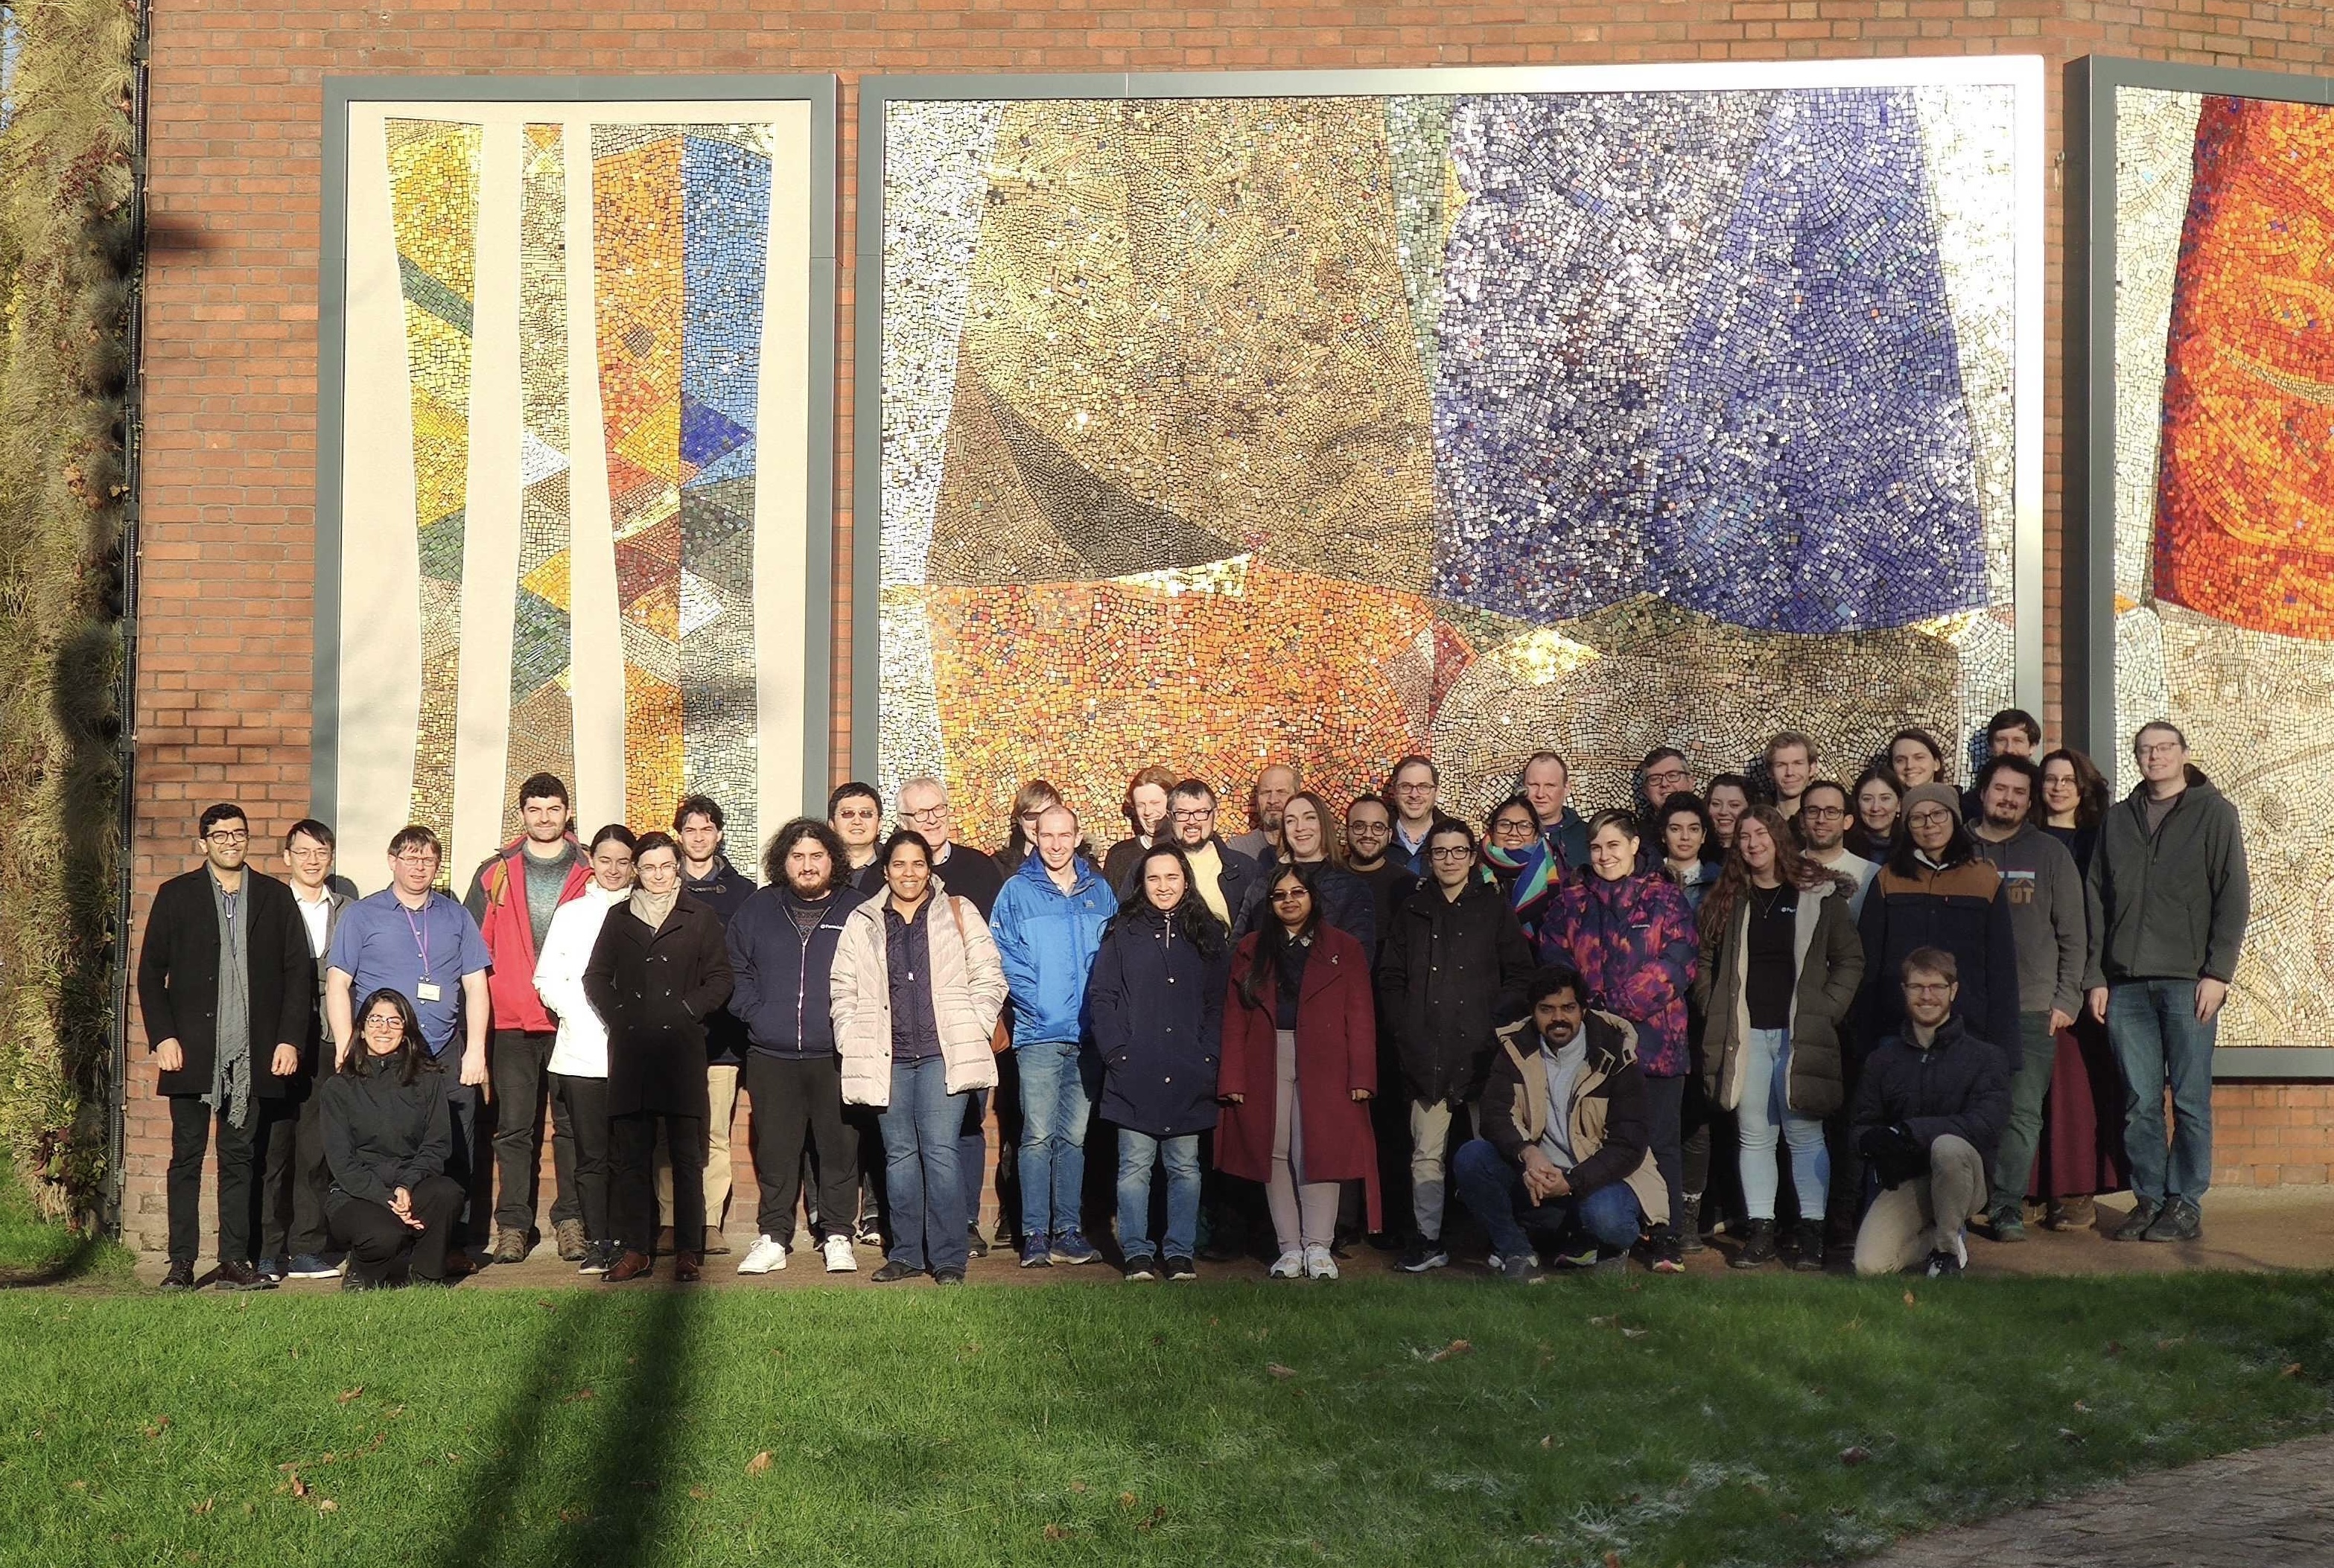 Members of the MicroBooNE Collaboration lined up in from of a decorative mosaic artwork on a red brick wall.